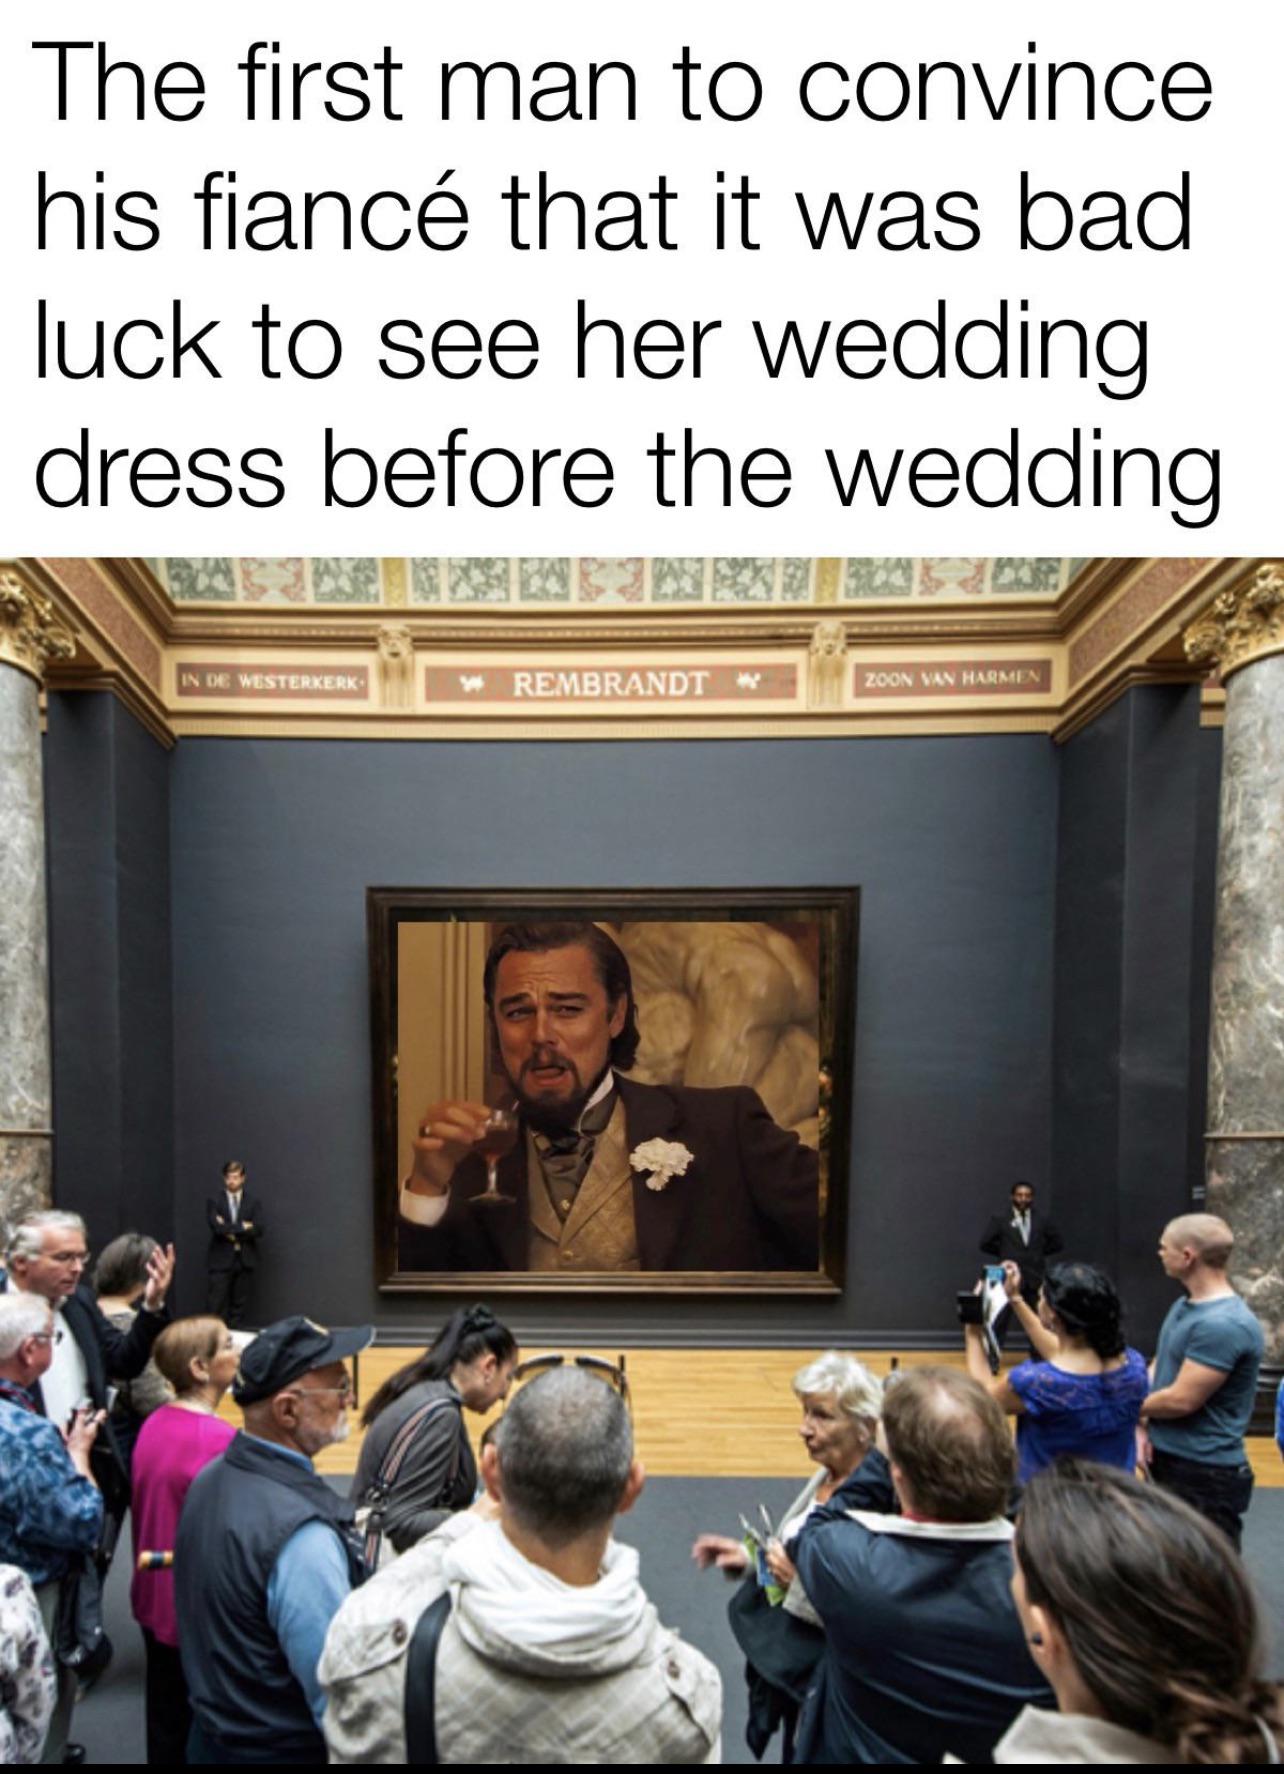 funny memes - rijksmuseum - The first man to convince his fianc that it was bad luck to see her wedding dress before the wedding In De Westerkerk Rembrandt Zoon Van Harmen